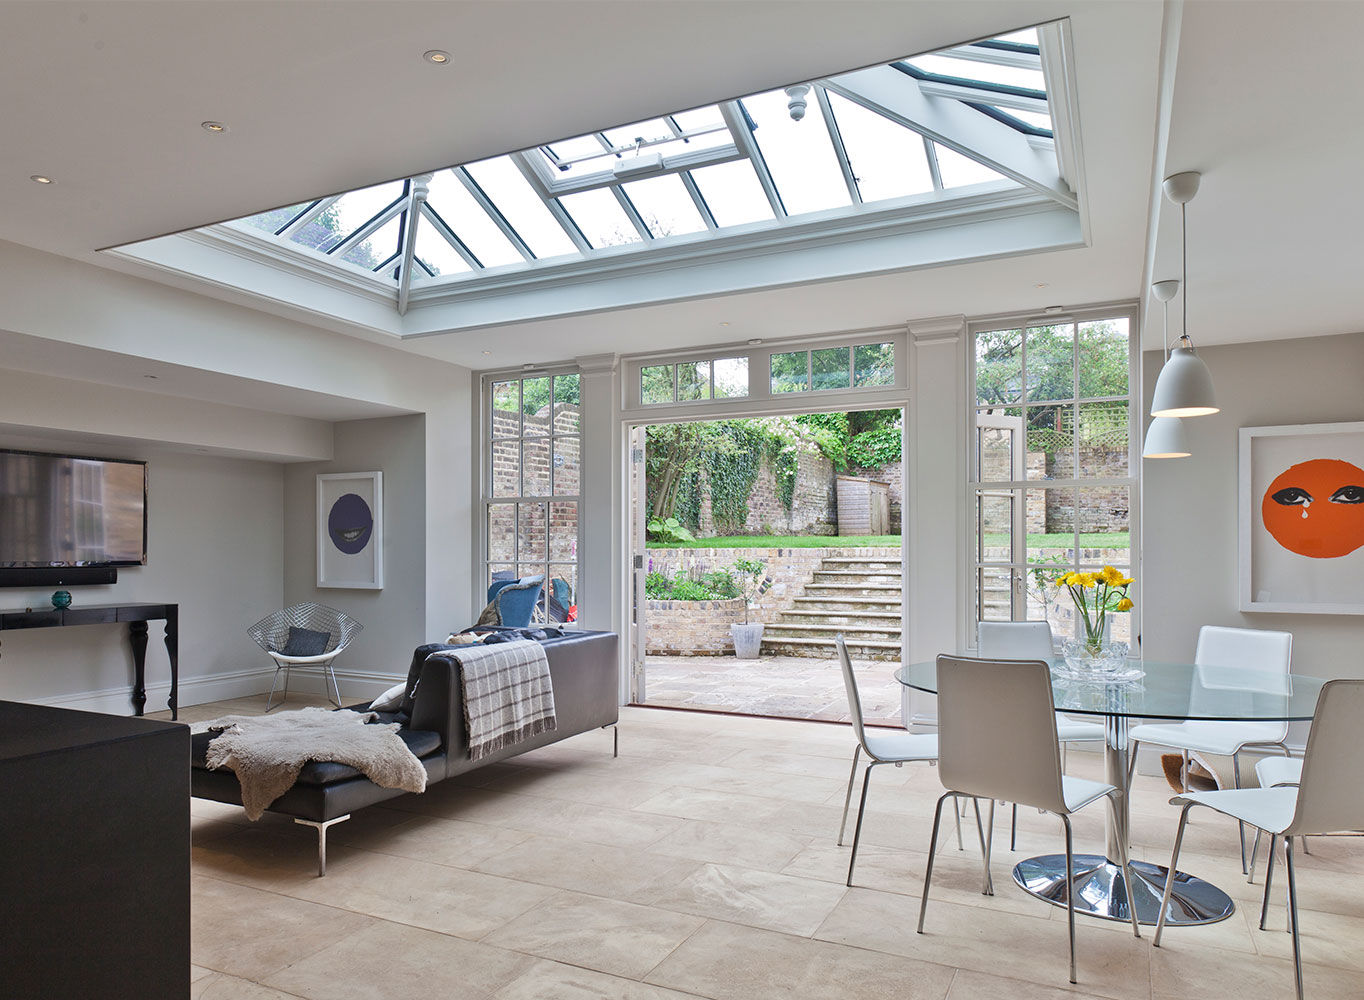 Orangery room used for sitting and entertaining